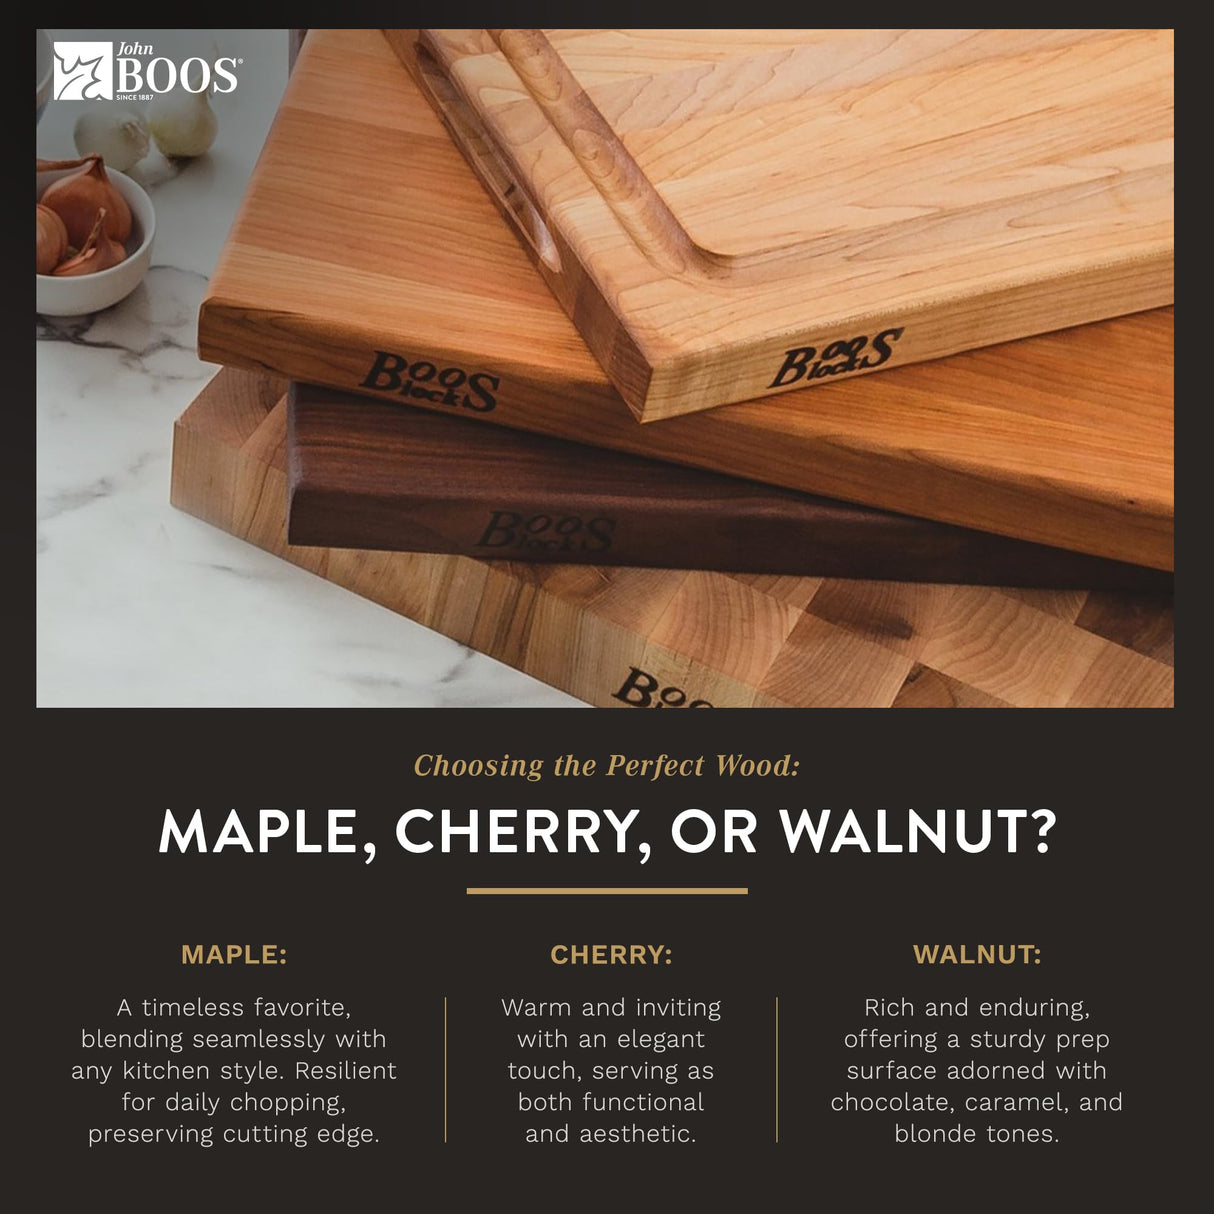 John Boos CCB183-S Large Maple Wood Cutting Board for Kitchen 18 x Inches, 3 Inches Thick Reversible End Grain Charcuterie Block with Finger Grips 18X18X3 MPL-END GR-REV-GR